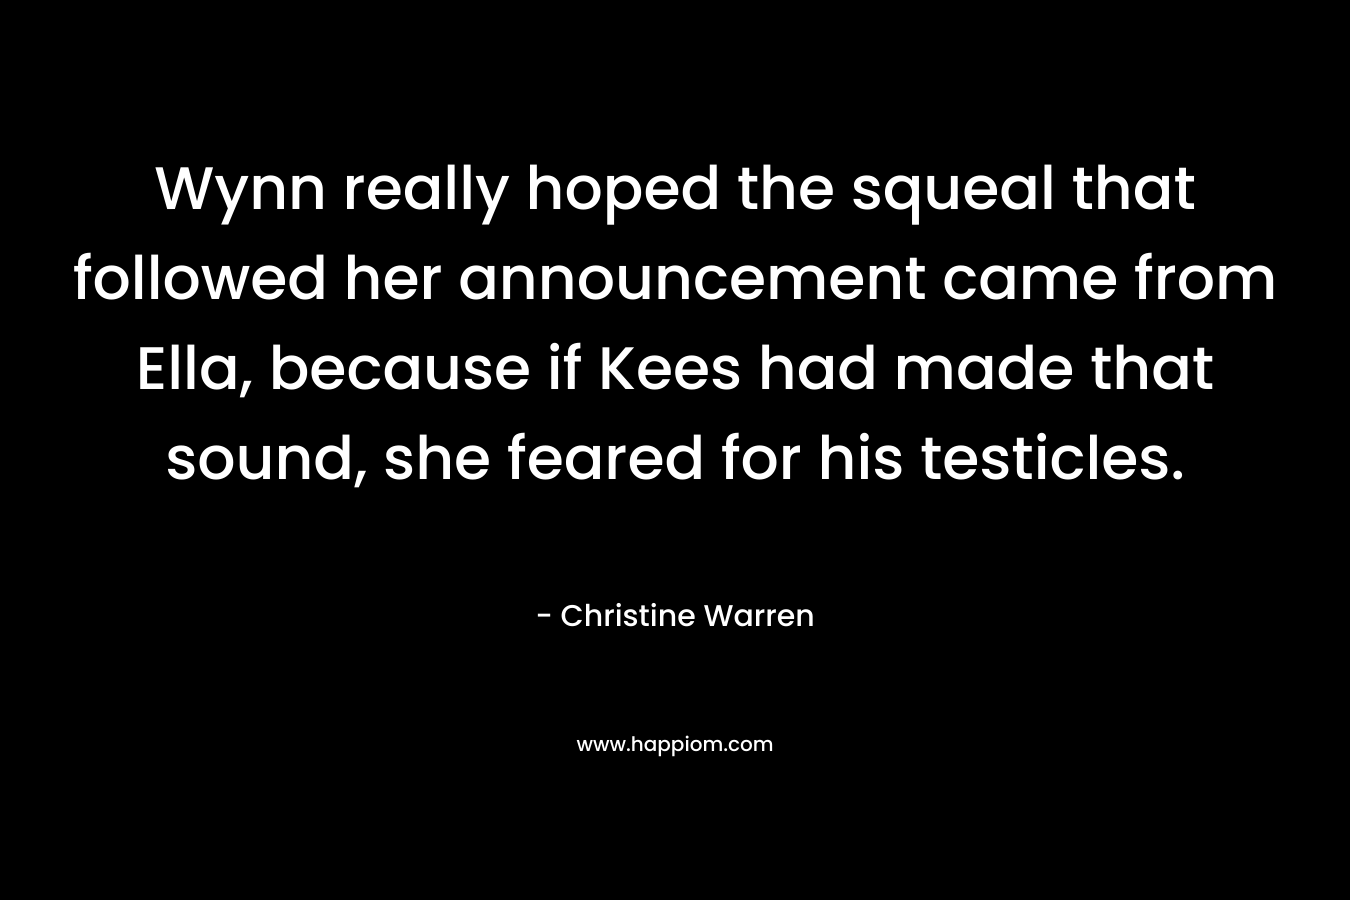 Wynn really hoped the squeal that followed her announcement came from Ella, because if Kees had made that sound, she feared for his testicles.